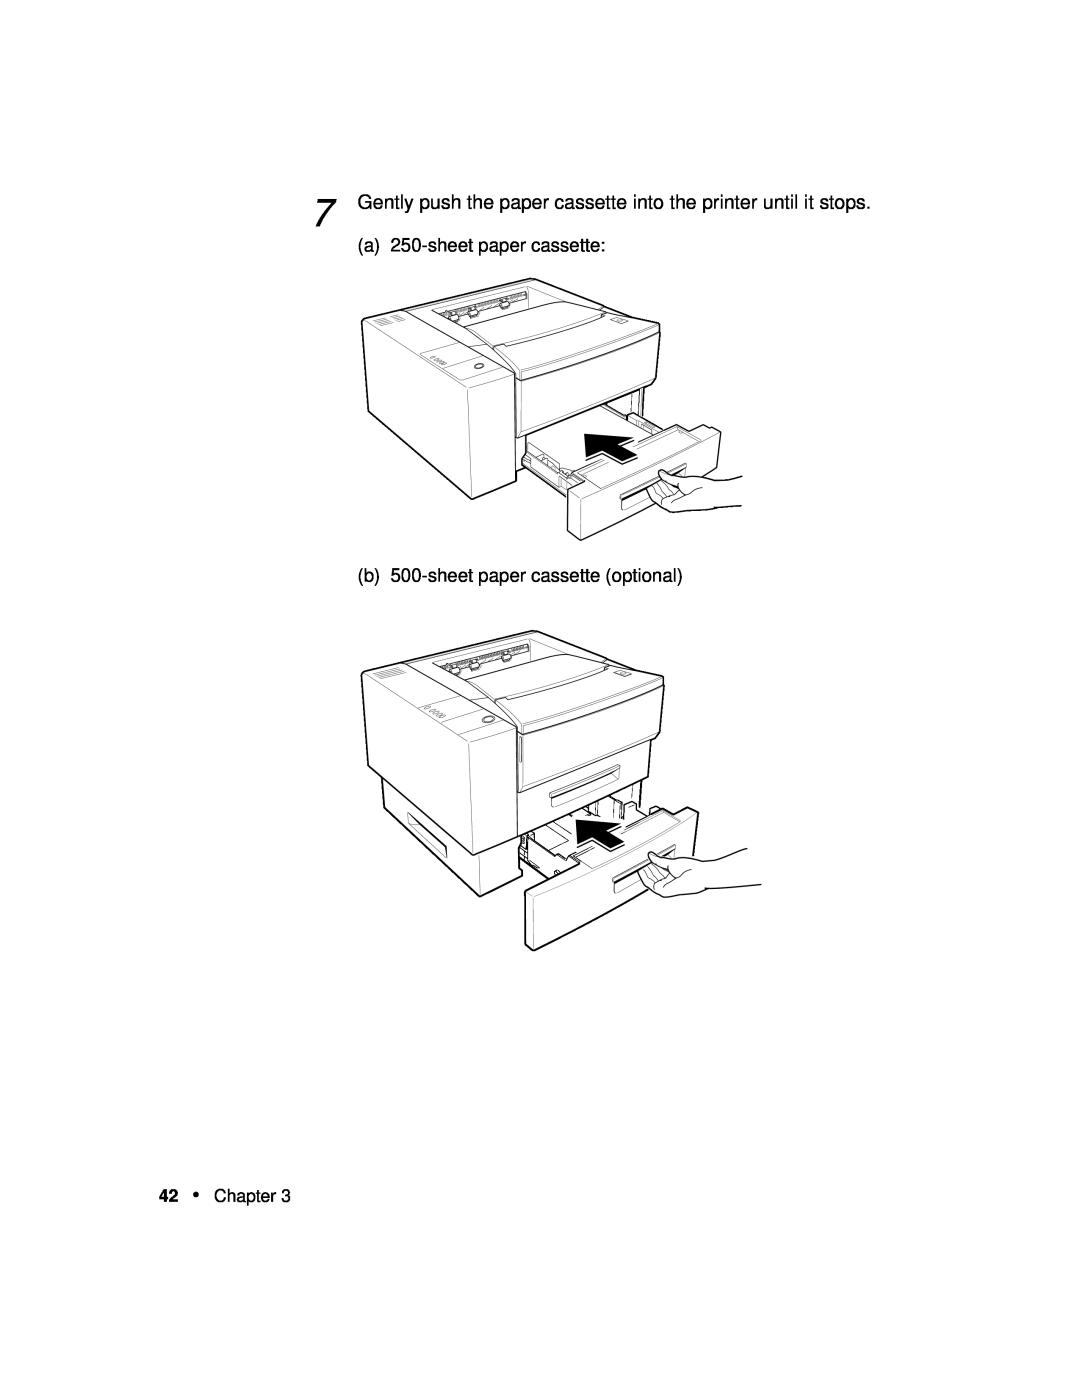 Xerox P12 manual Gently push the paper cassette into the printer until it stops, a 250-sheet paper cassette 